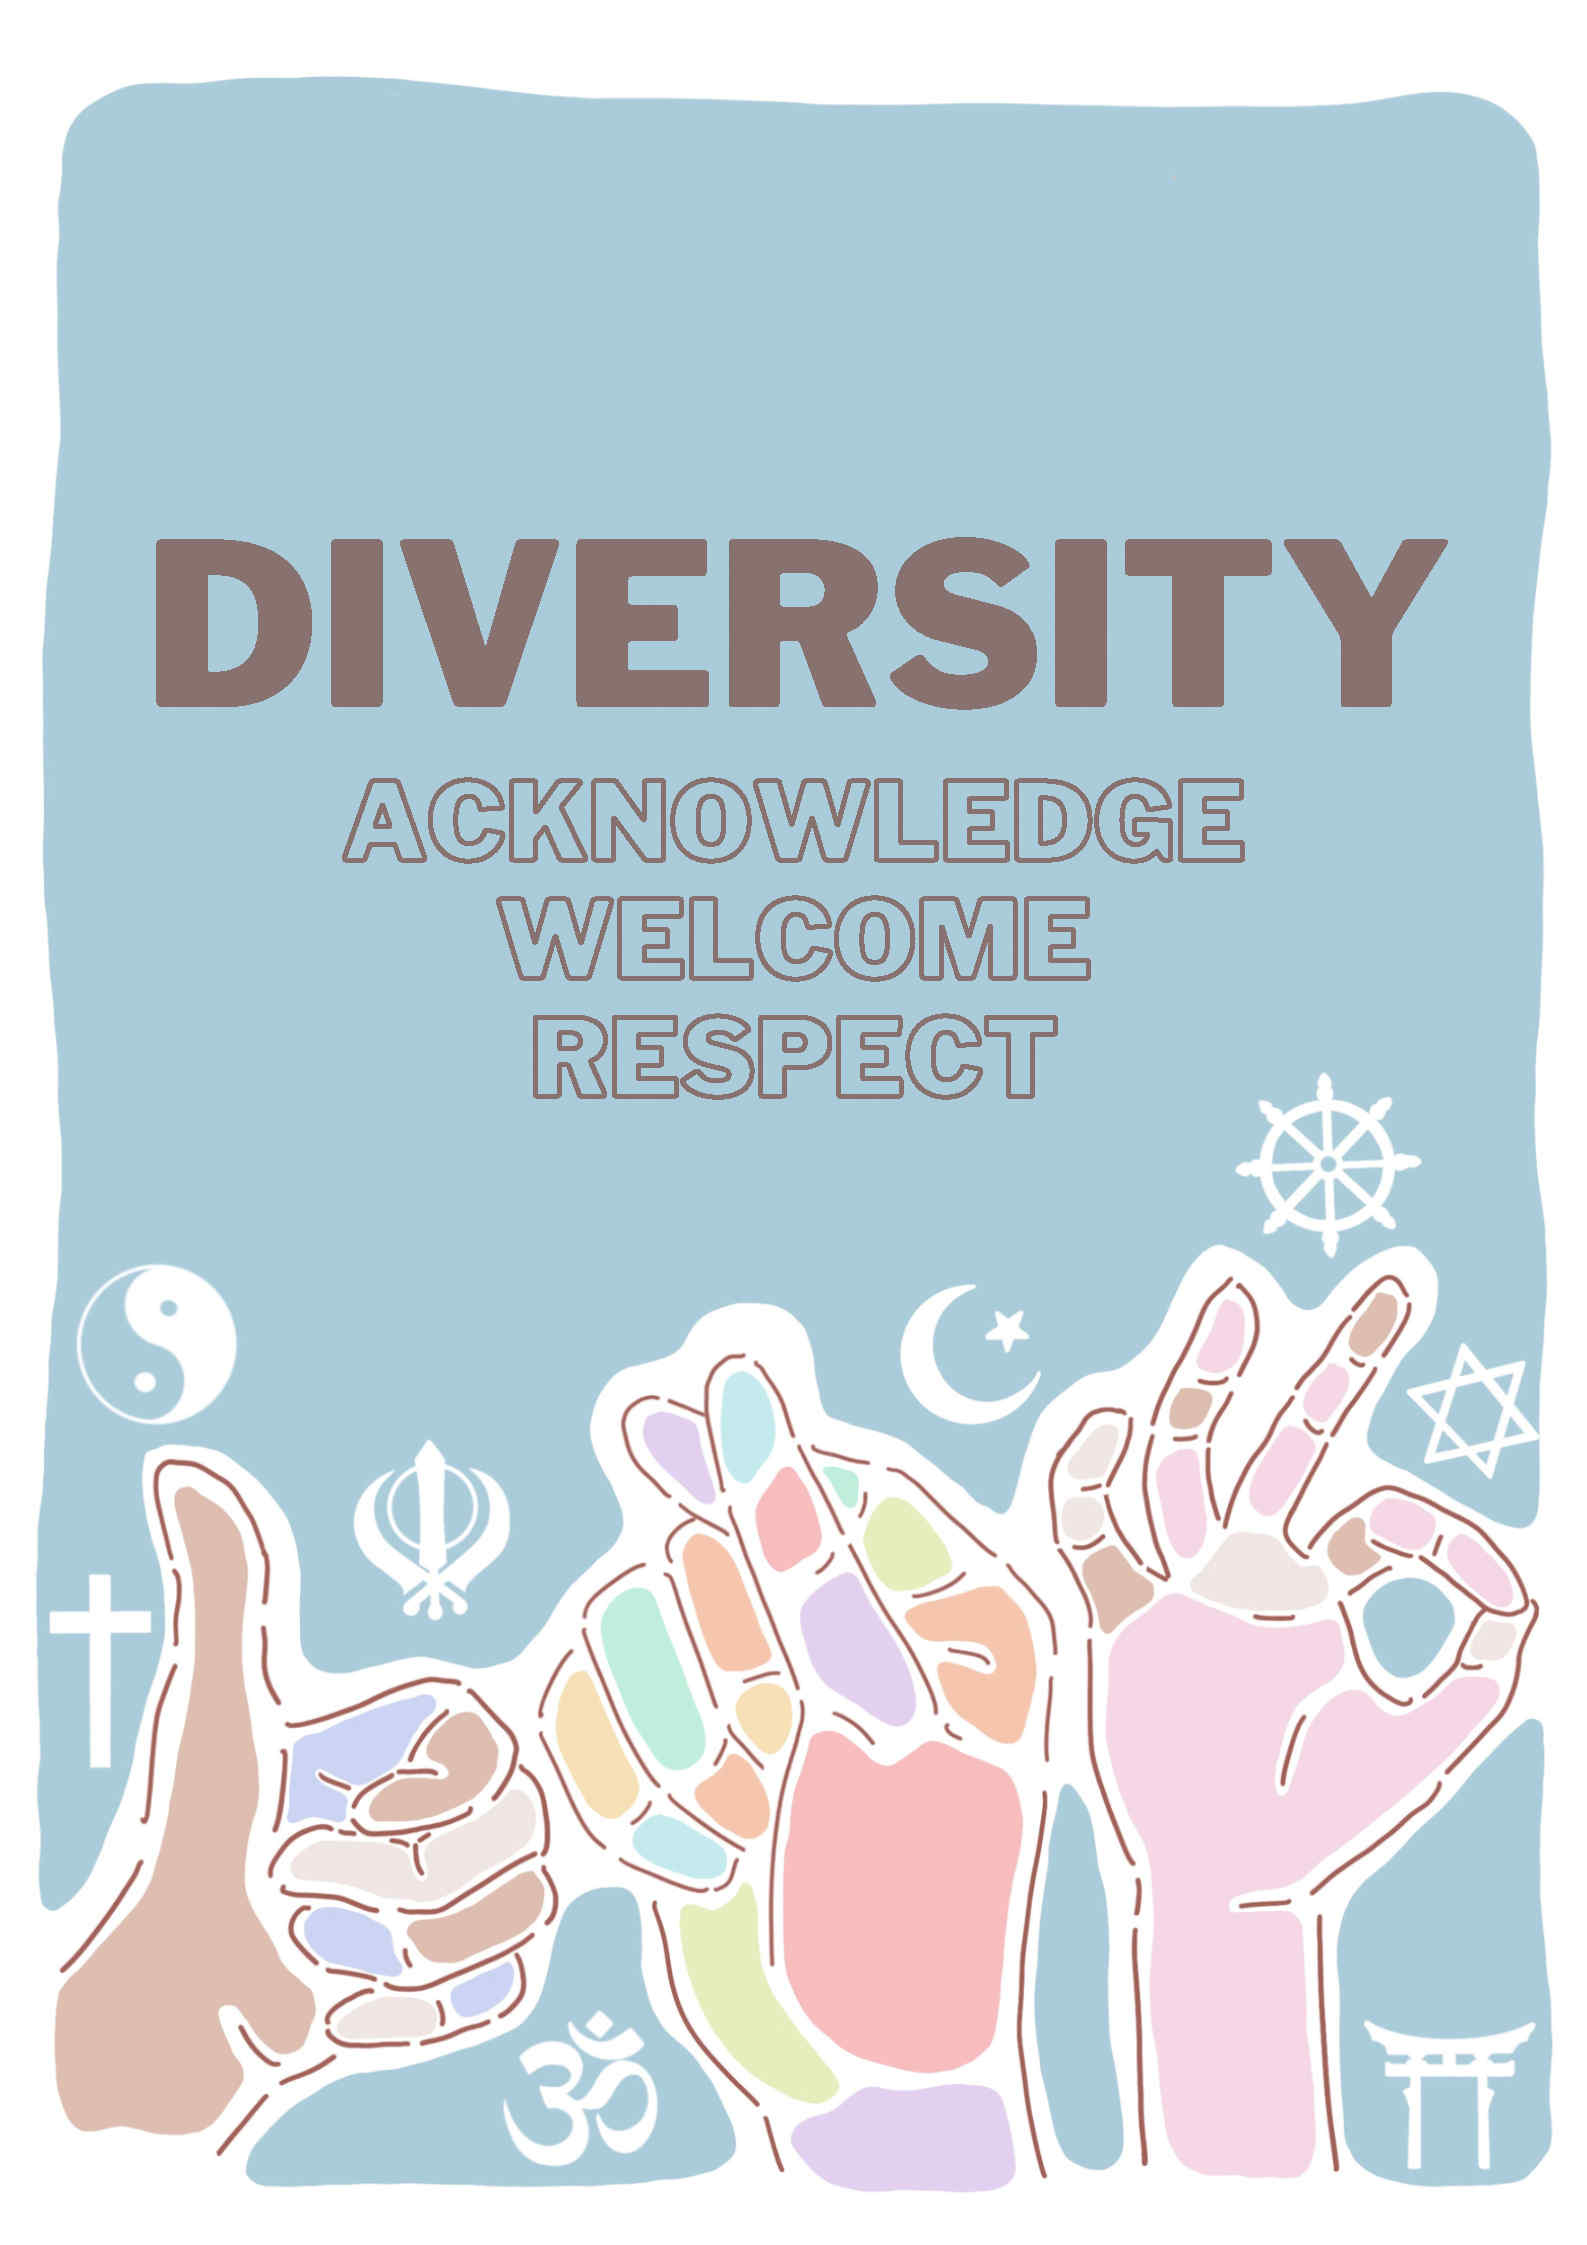 Champion: Diversity in HKU acknowledge welcome respect (Description as the text on the webpage)